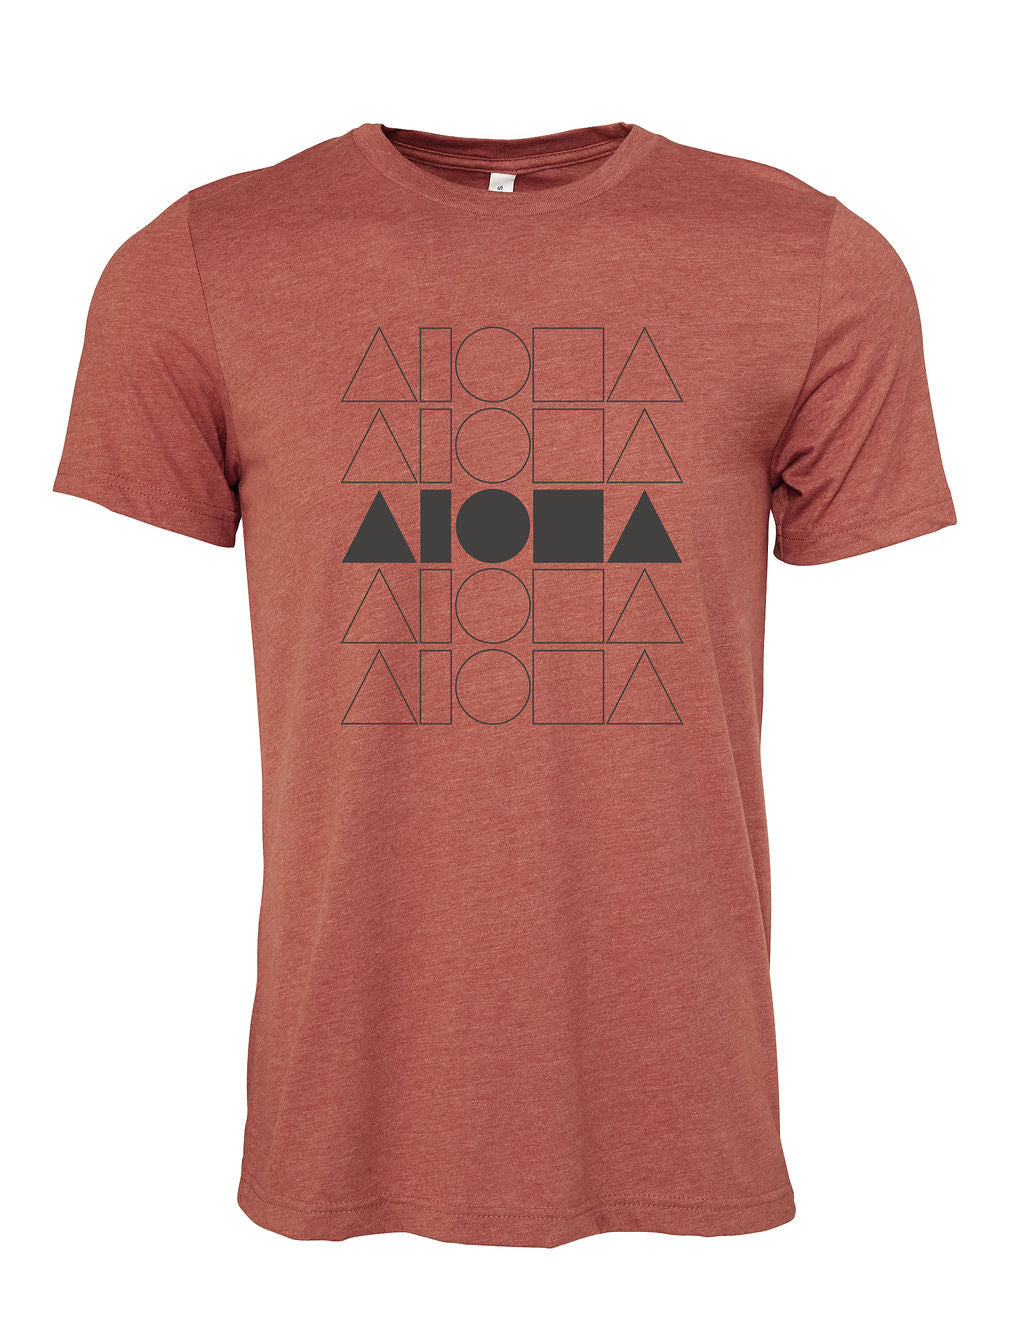 Heather clay colored unisex sueded jersey t-shirt printed front with Stacked Aloha Shapes® logo on front chest in dark grey